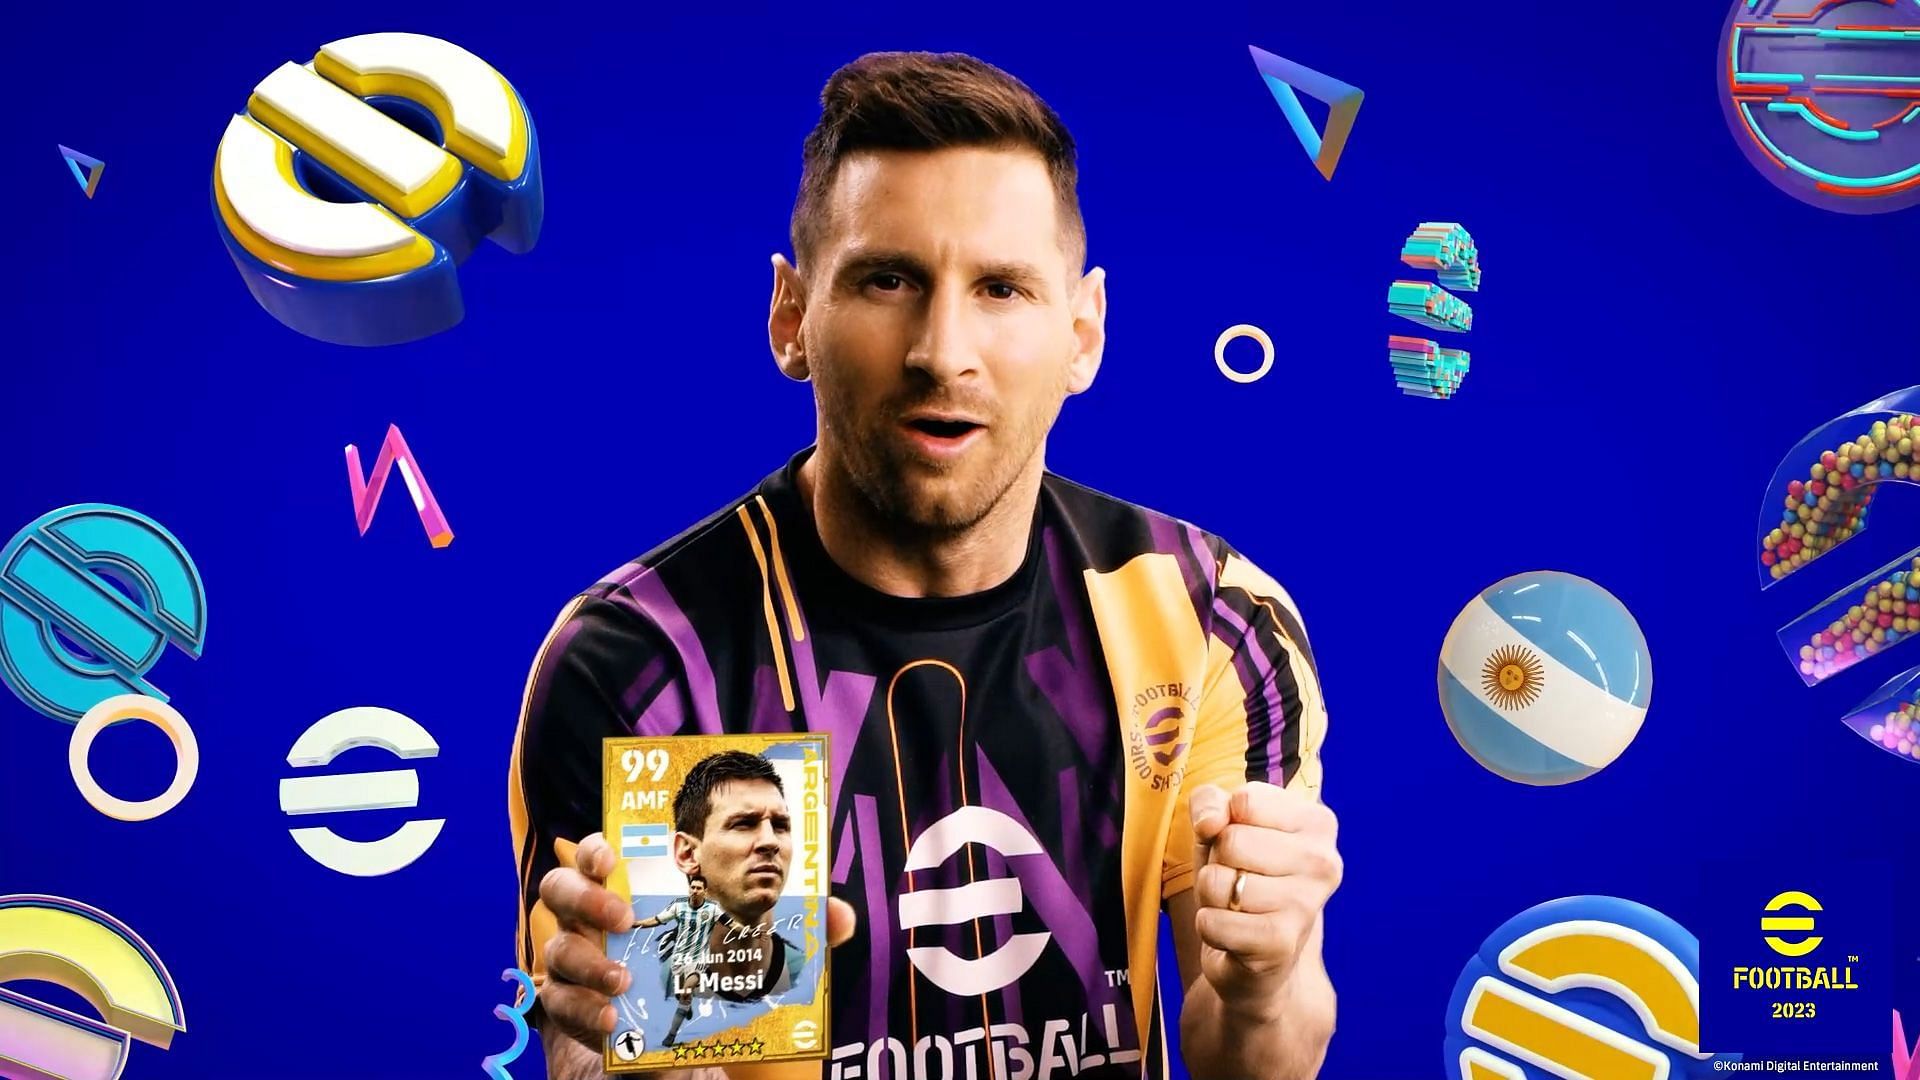 eFootball 2023 v2.3.0 patch notes Major buffs to dribbling with ball